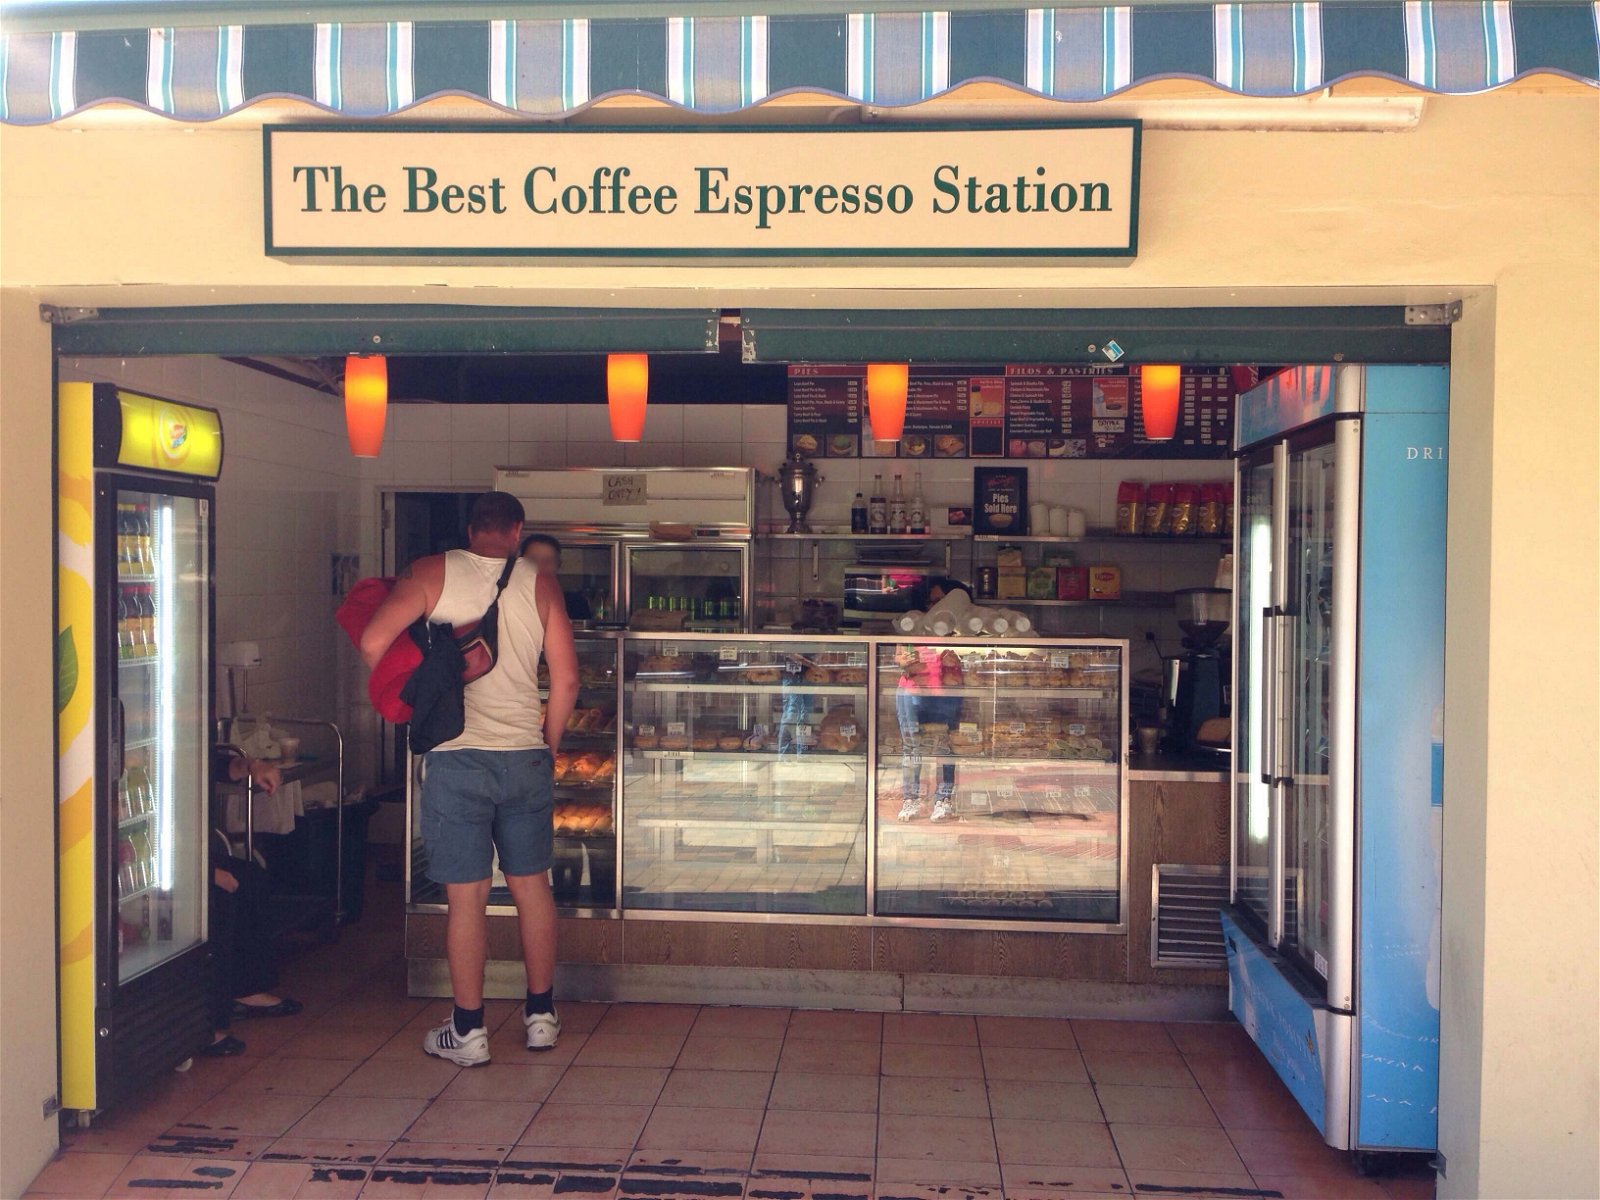 The Best Coffee Espresso Station - New South Wales Tourism 